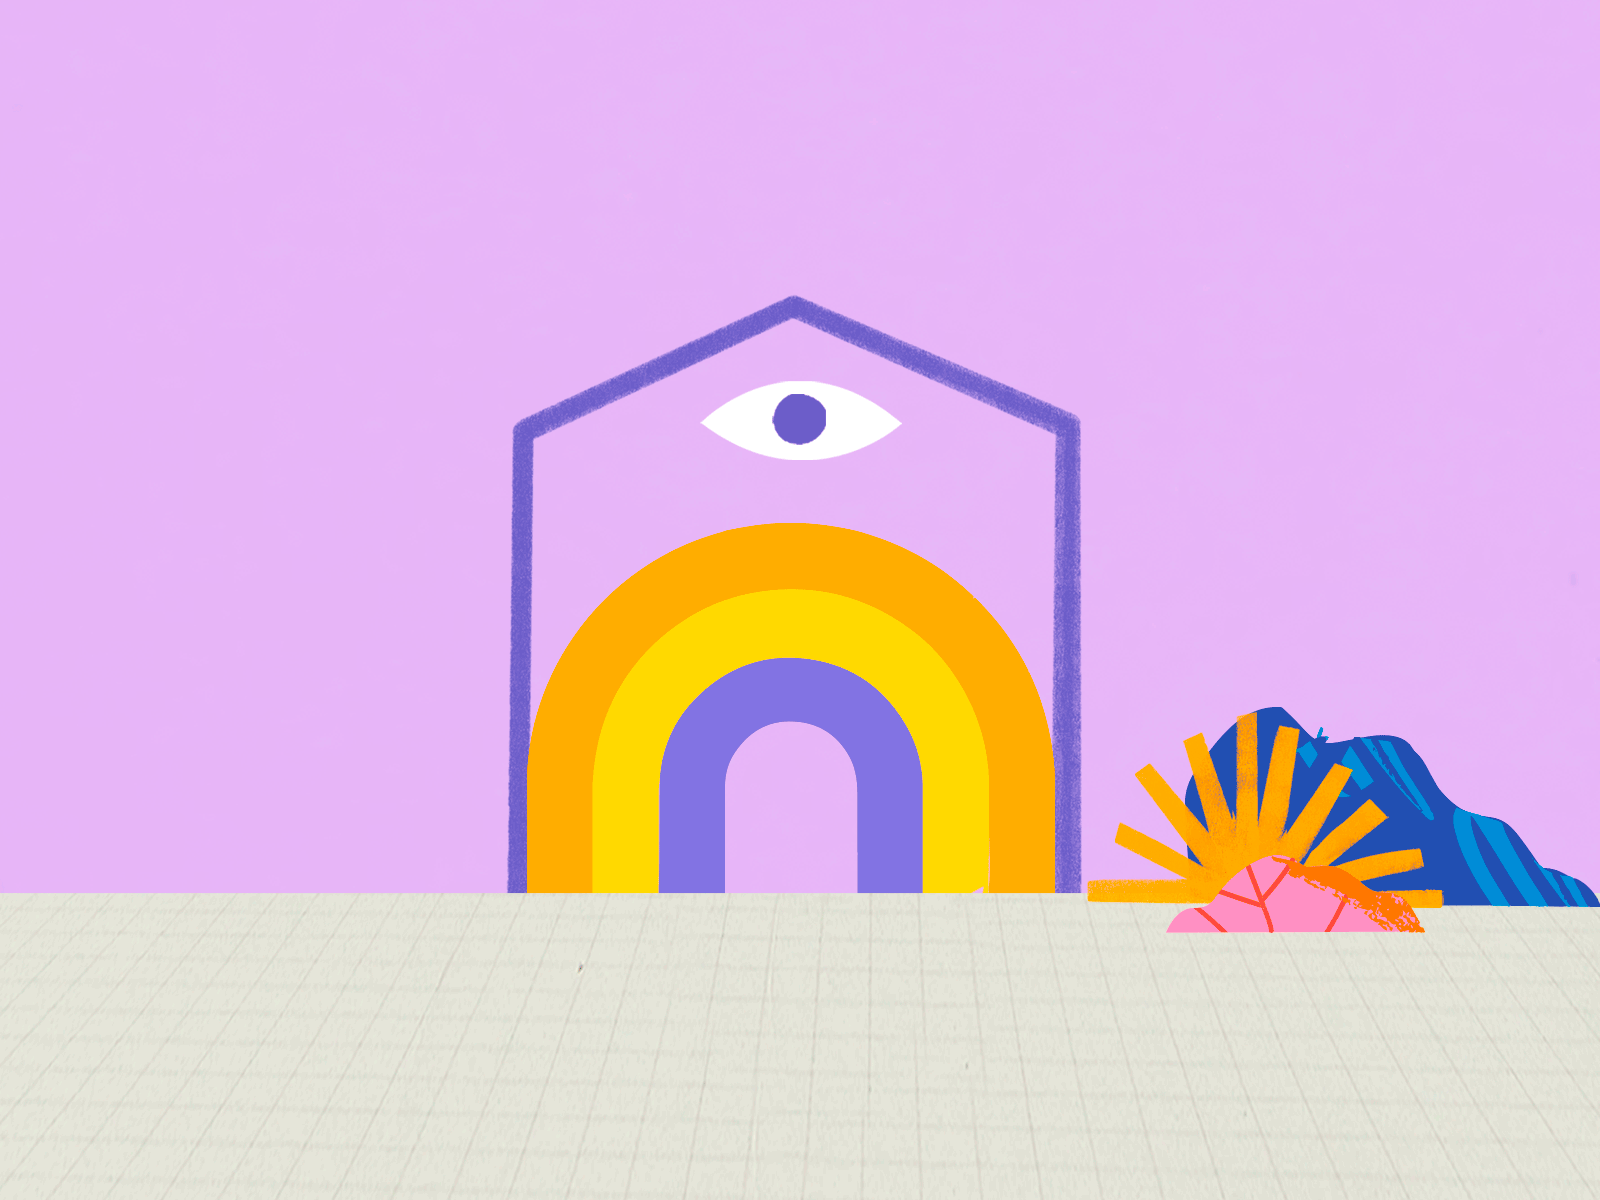 Casita Mágica animation eye frame by frame home loading loop magic plant rainbow stay at home stay home stay safe stayhome